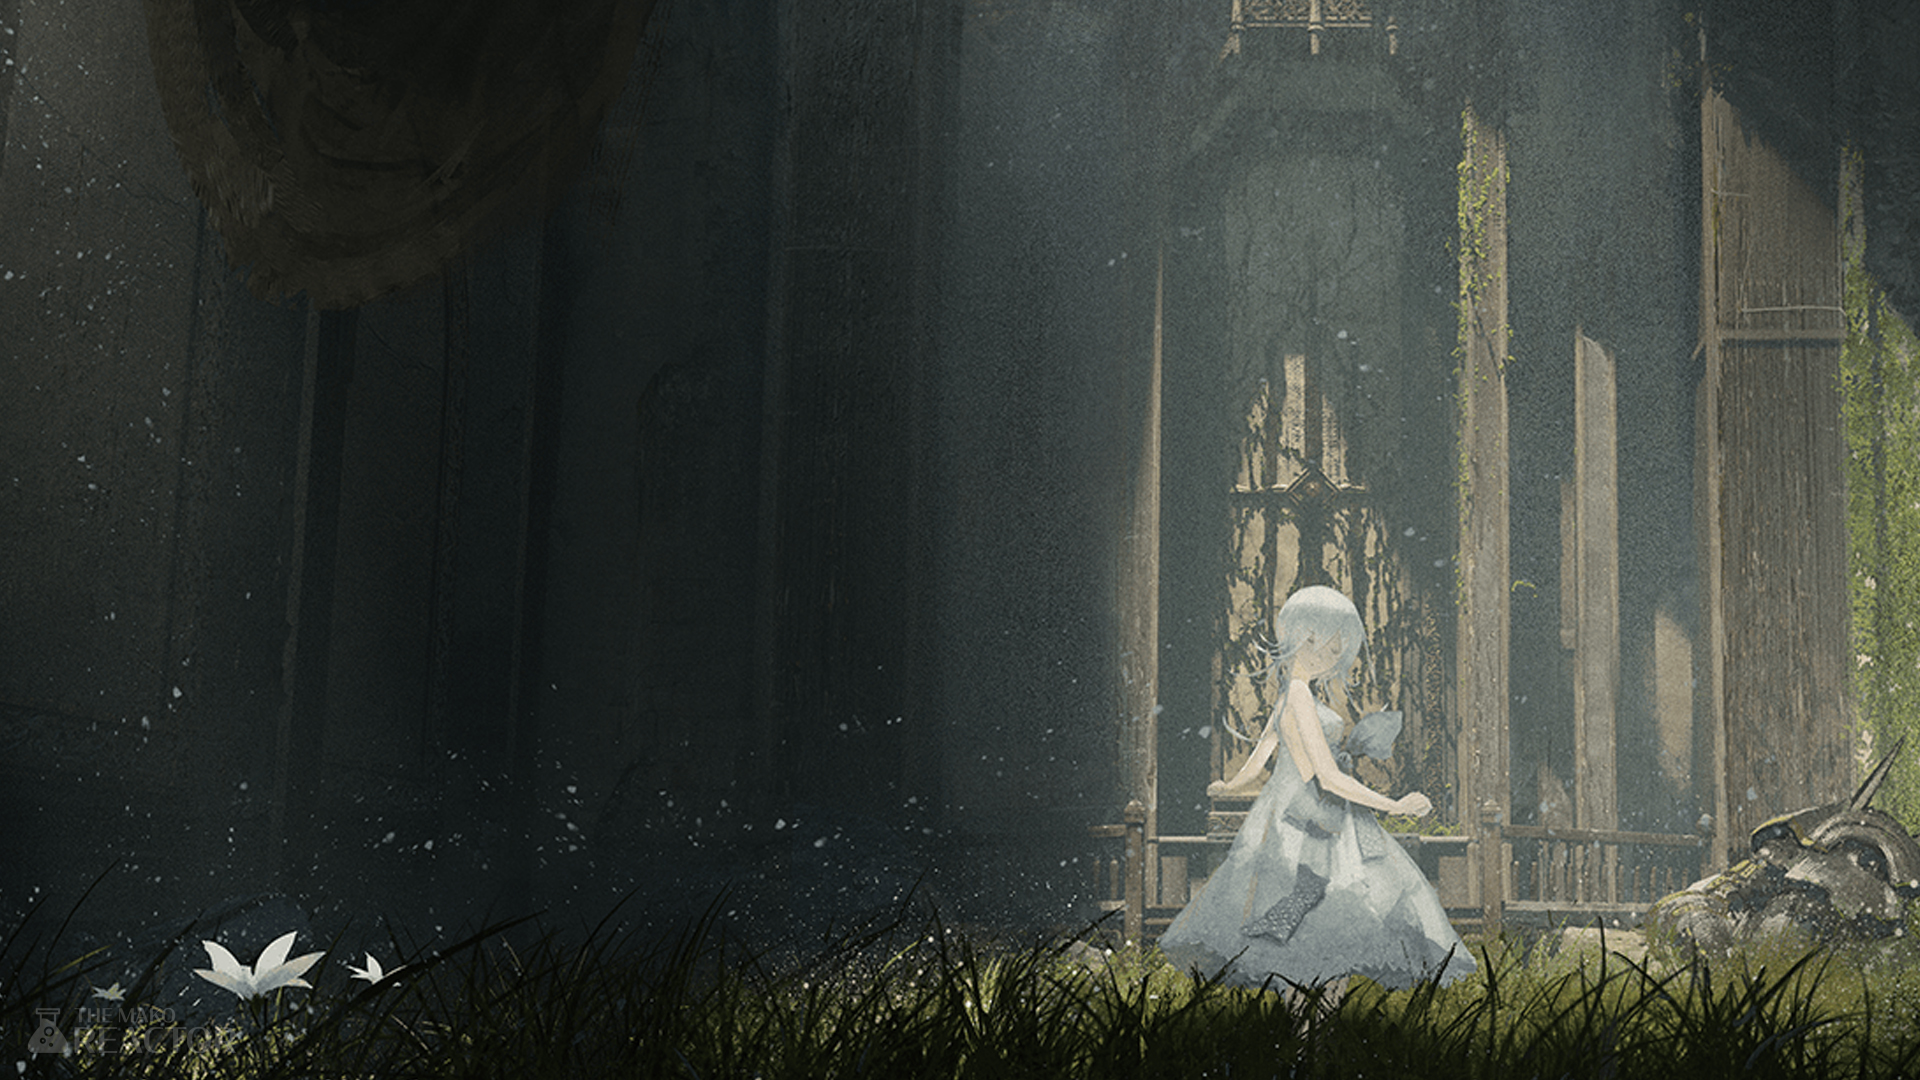 20 NieR Replicant HD Wallpapers and Backgrounds